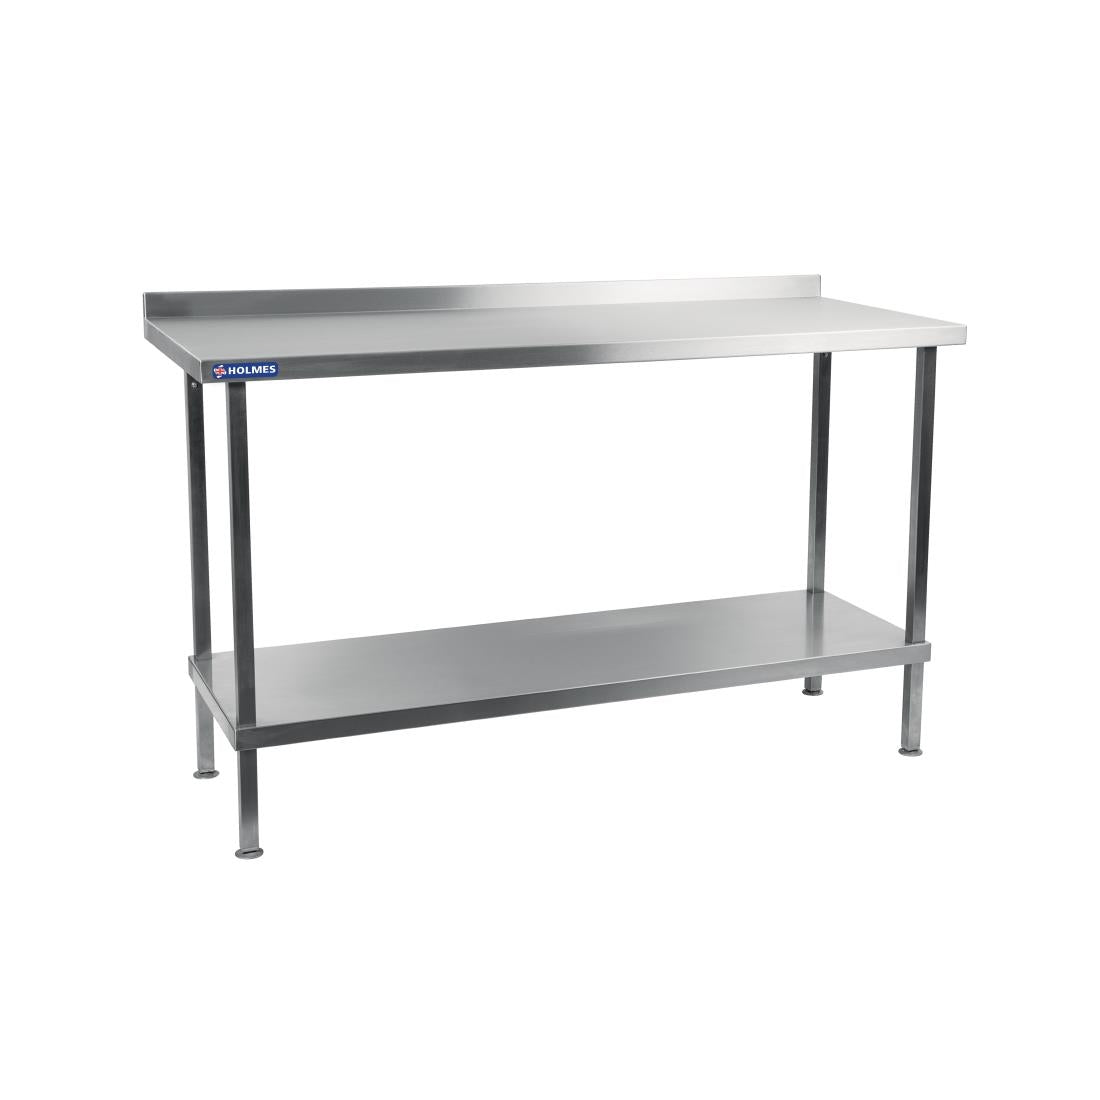 DR022 Holmes Stainless Steel Wall Table with Upstand 1200mm JD Catering Equipment Solutions Ltd